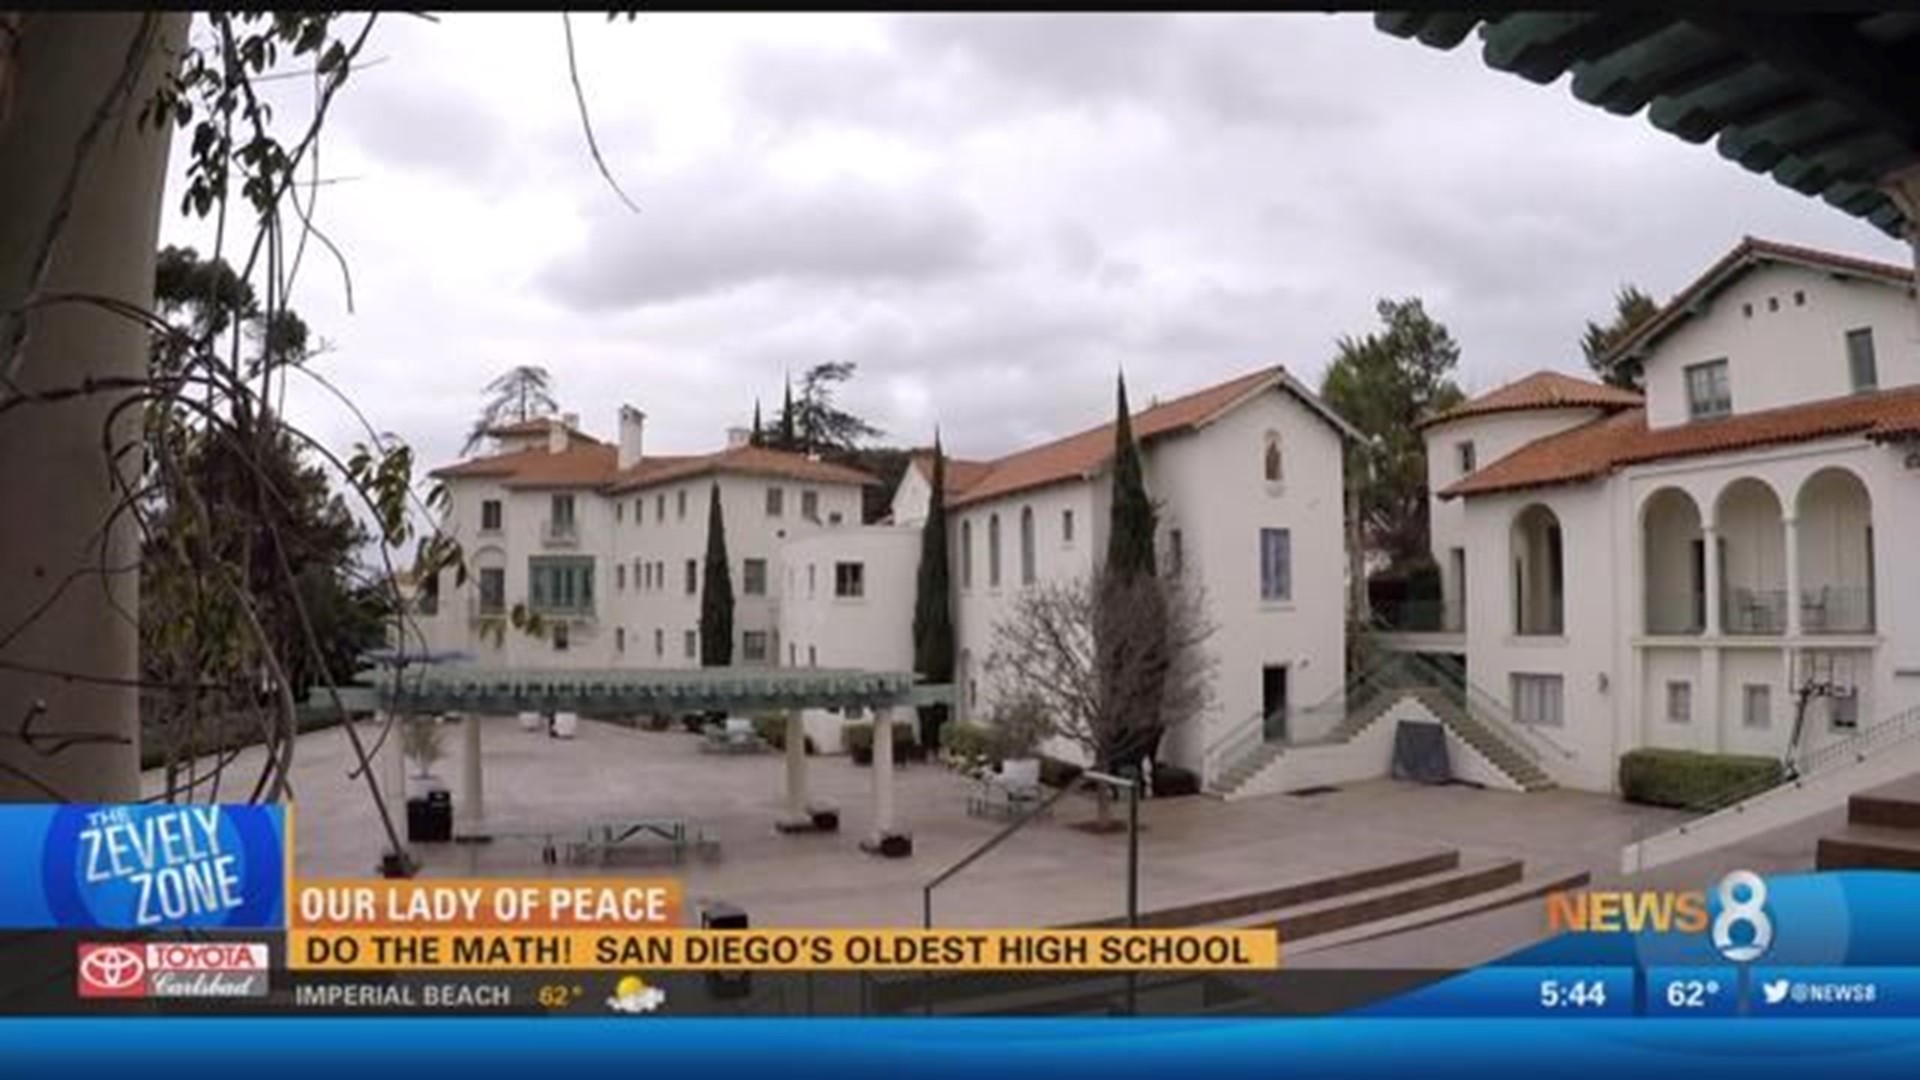 Do The Math: San Diego's oldest high school is Our Lady of Peace